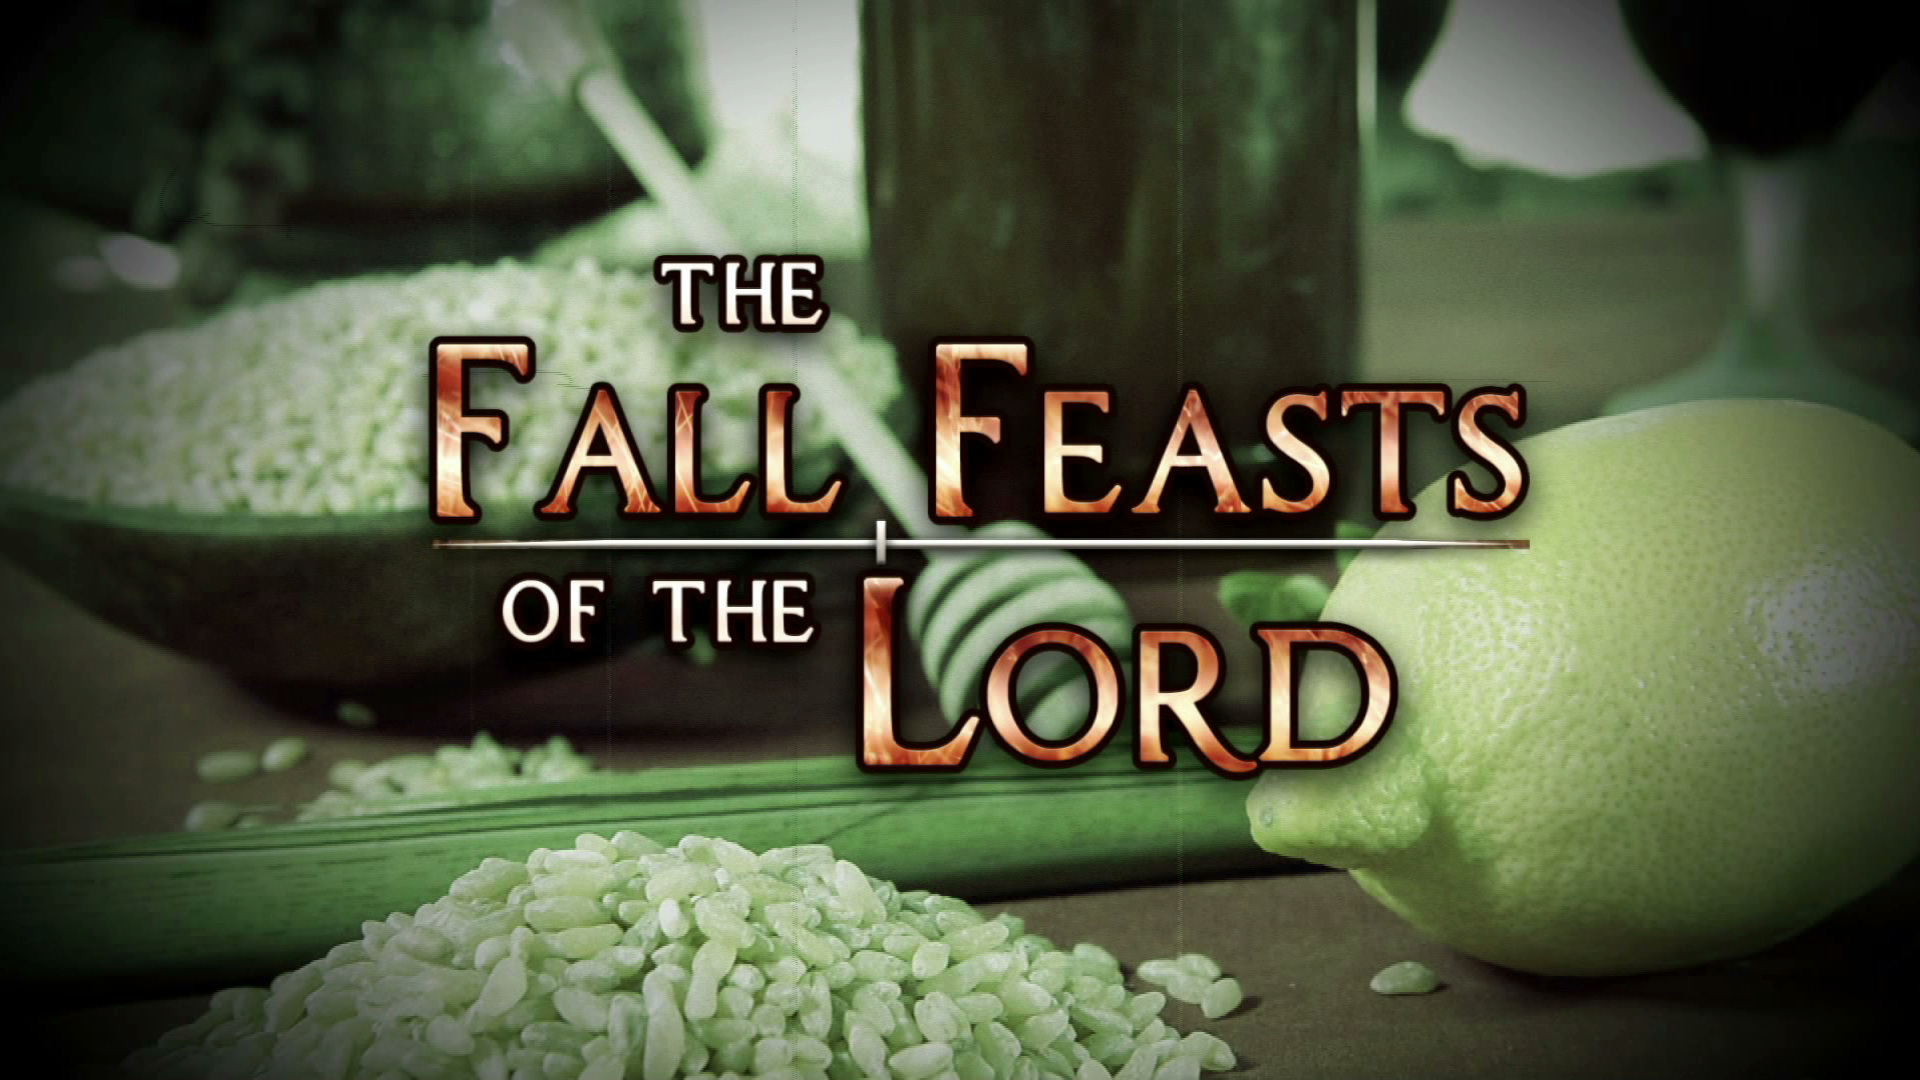 ZLM Video “Days of Remembrance The Fall Feasts of The Lord”